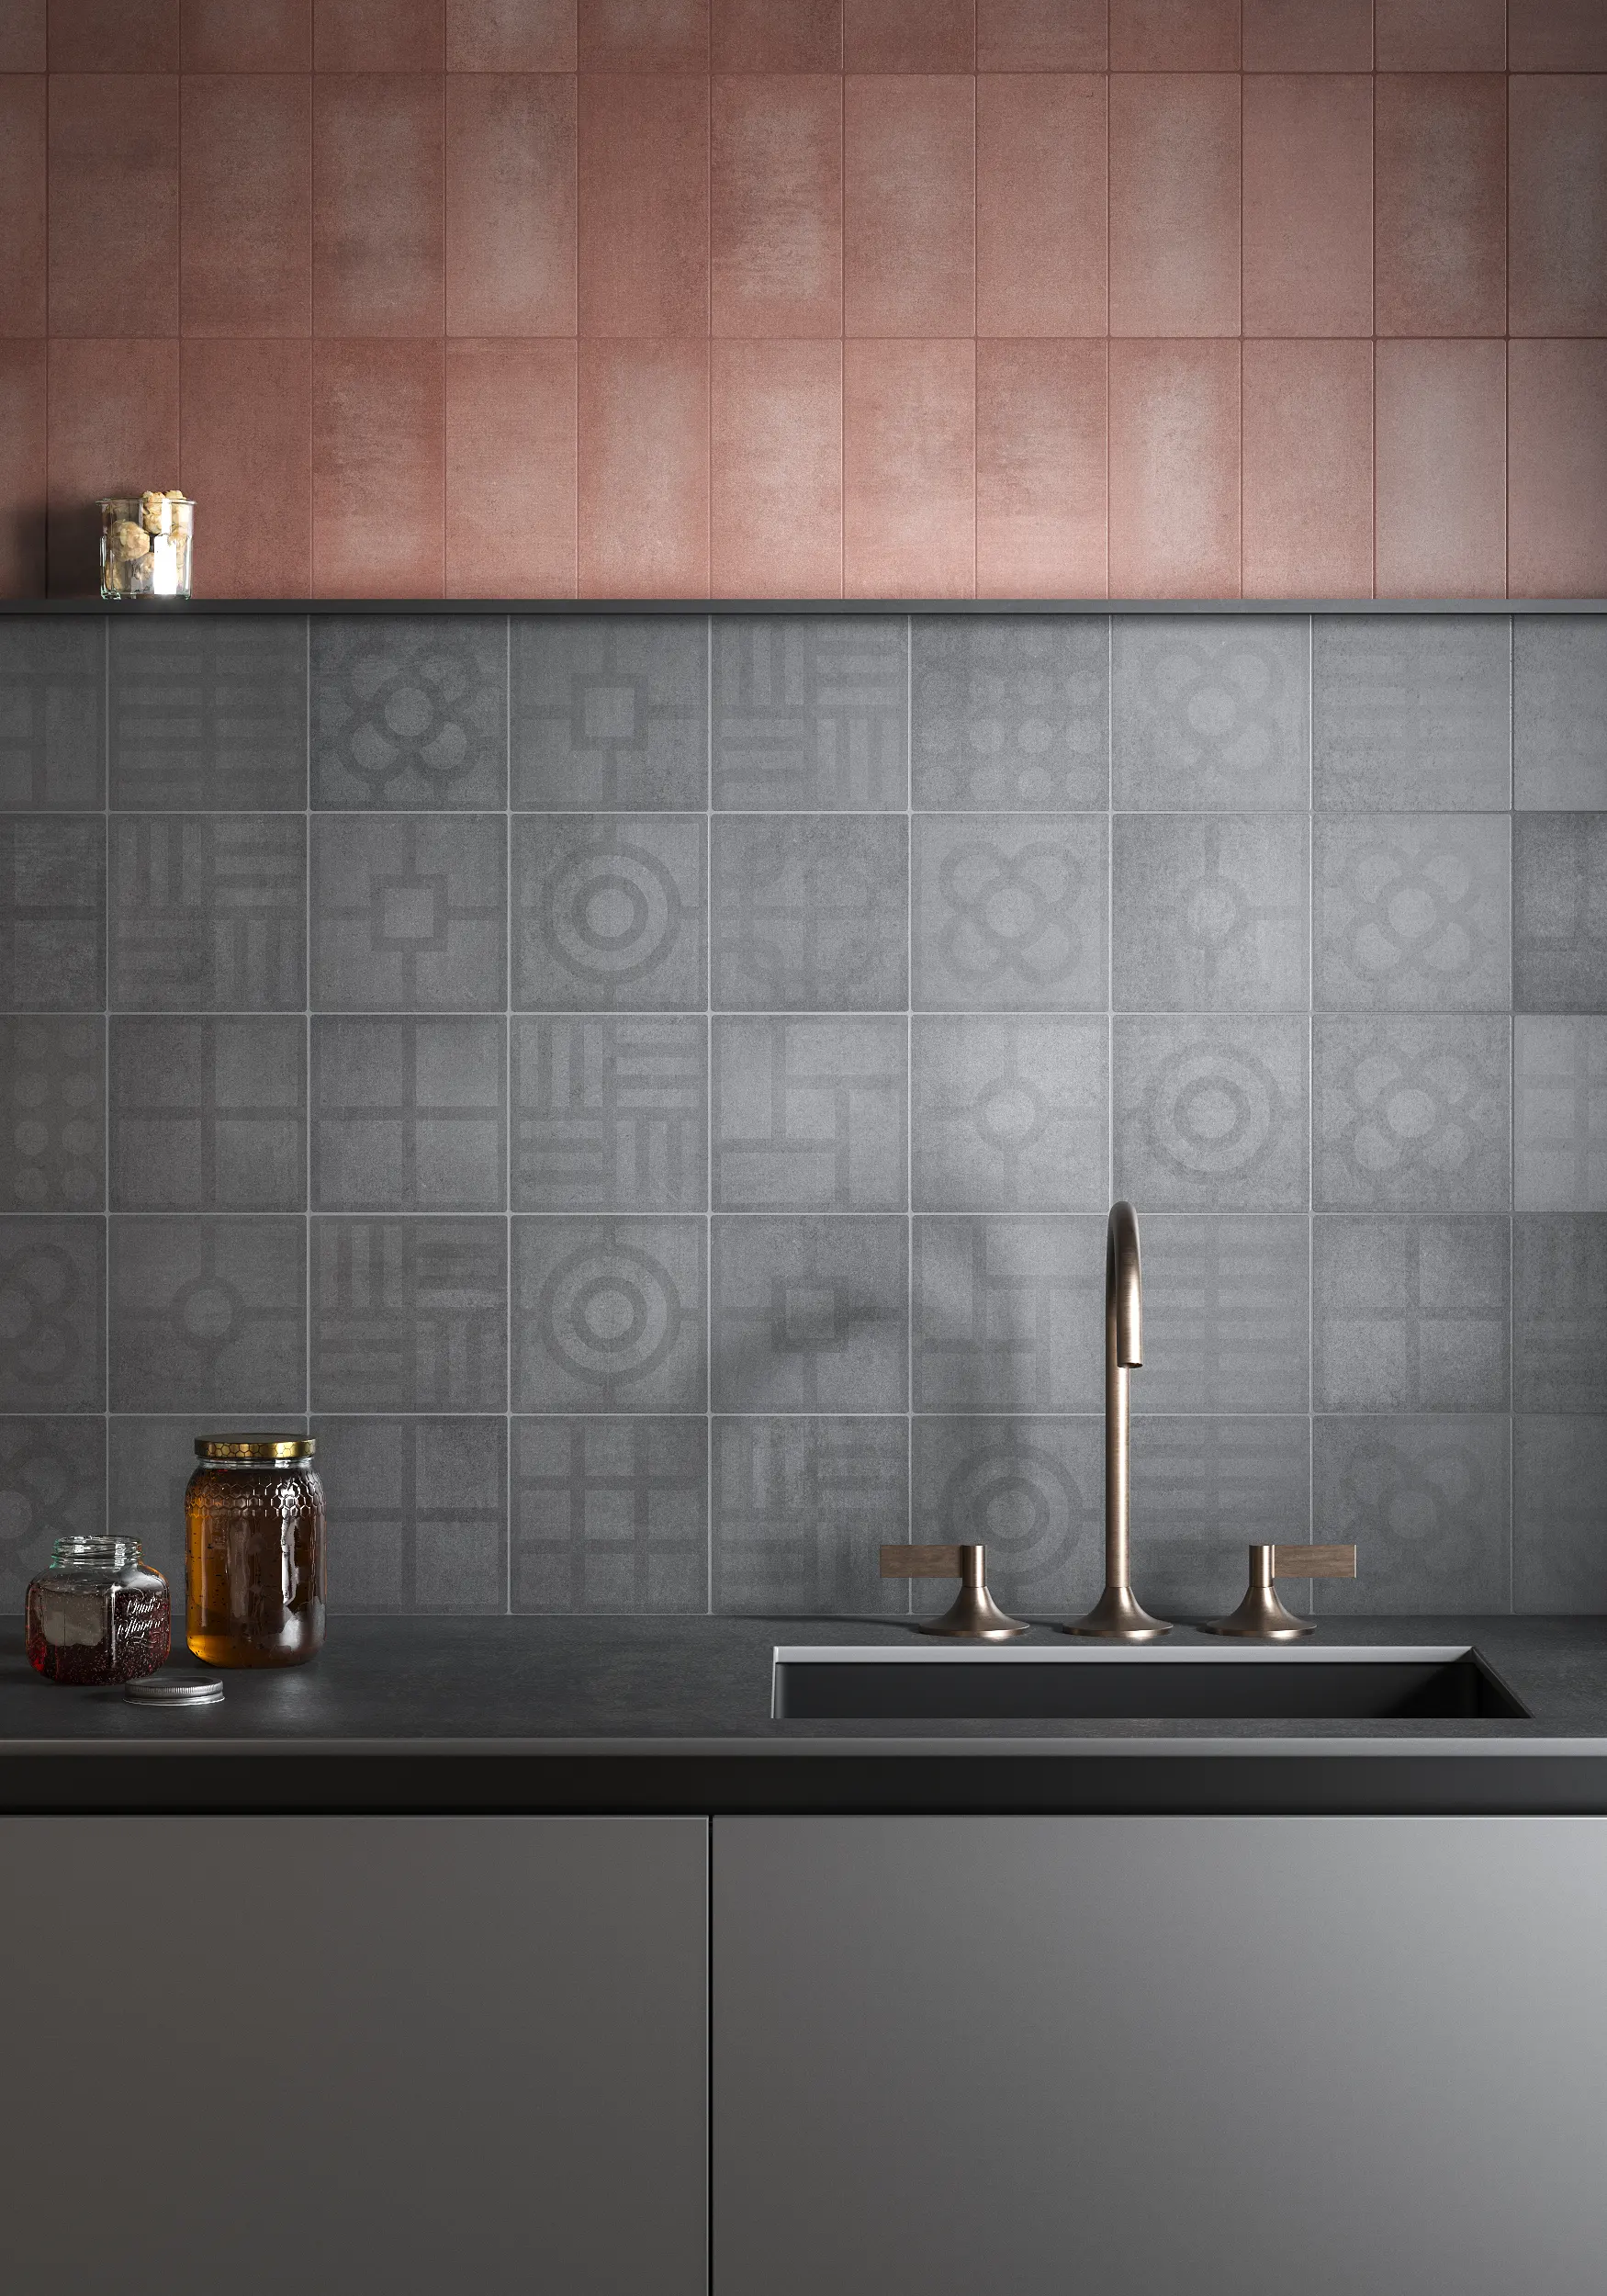 Kitchen wall with red concrete tiles in 10x20 cm